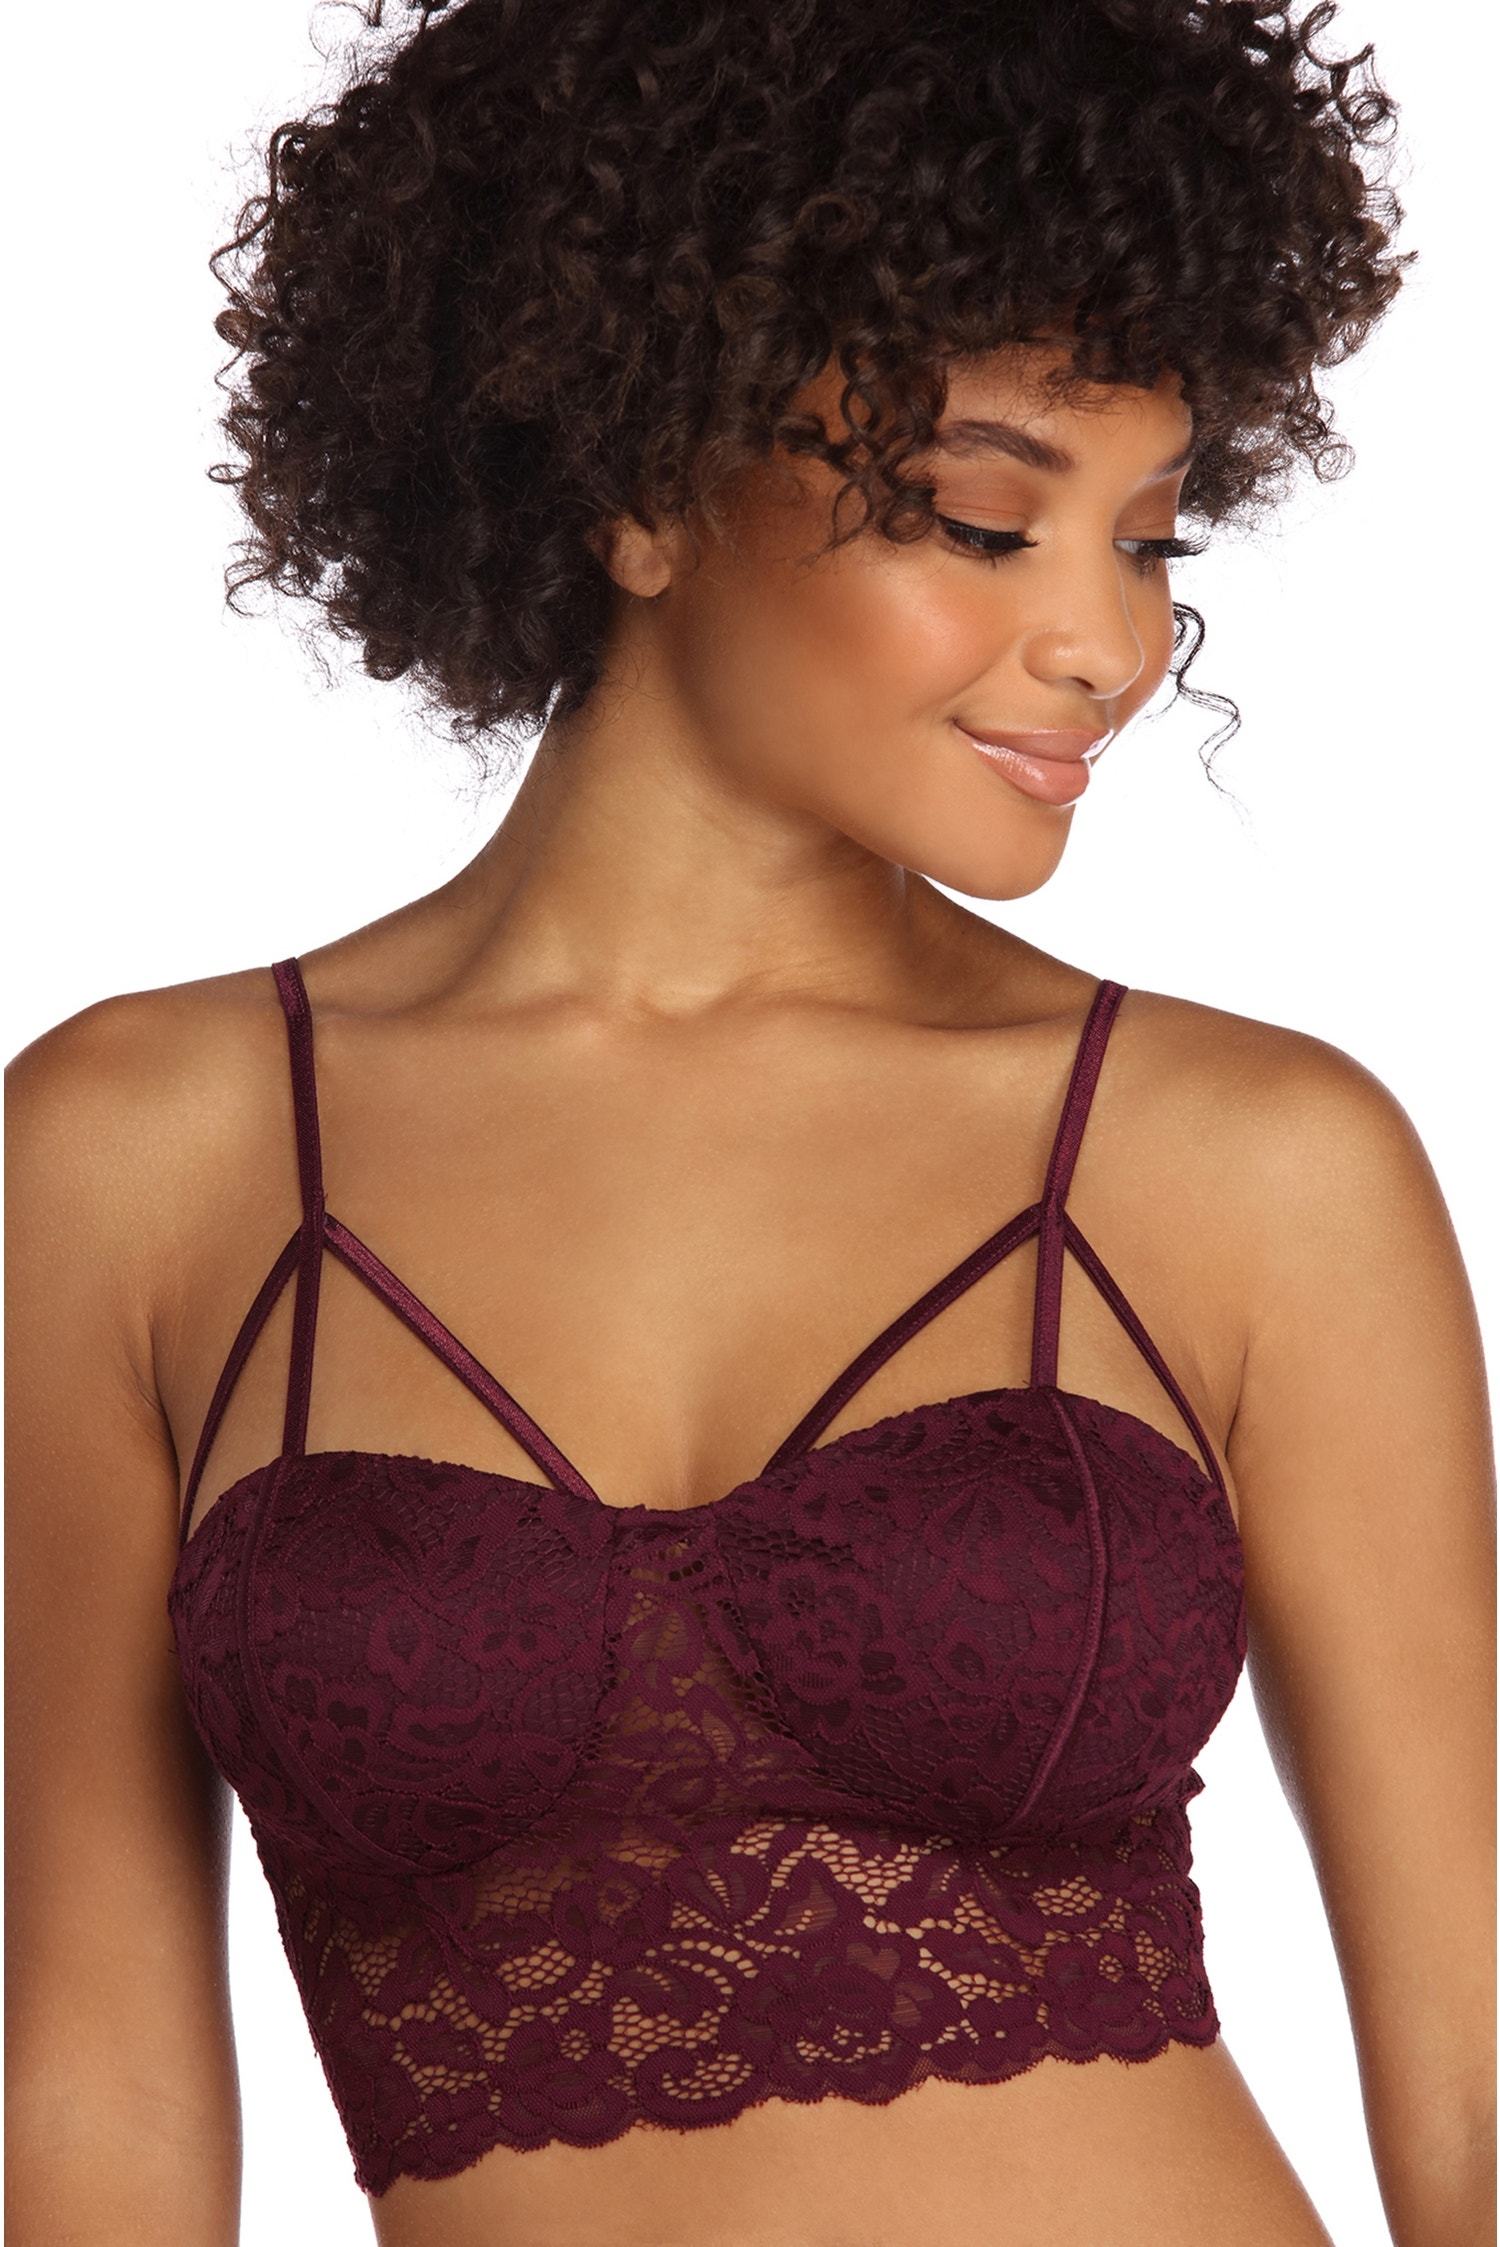 Caged In Lace Long Line Bralette